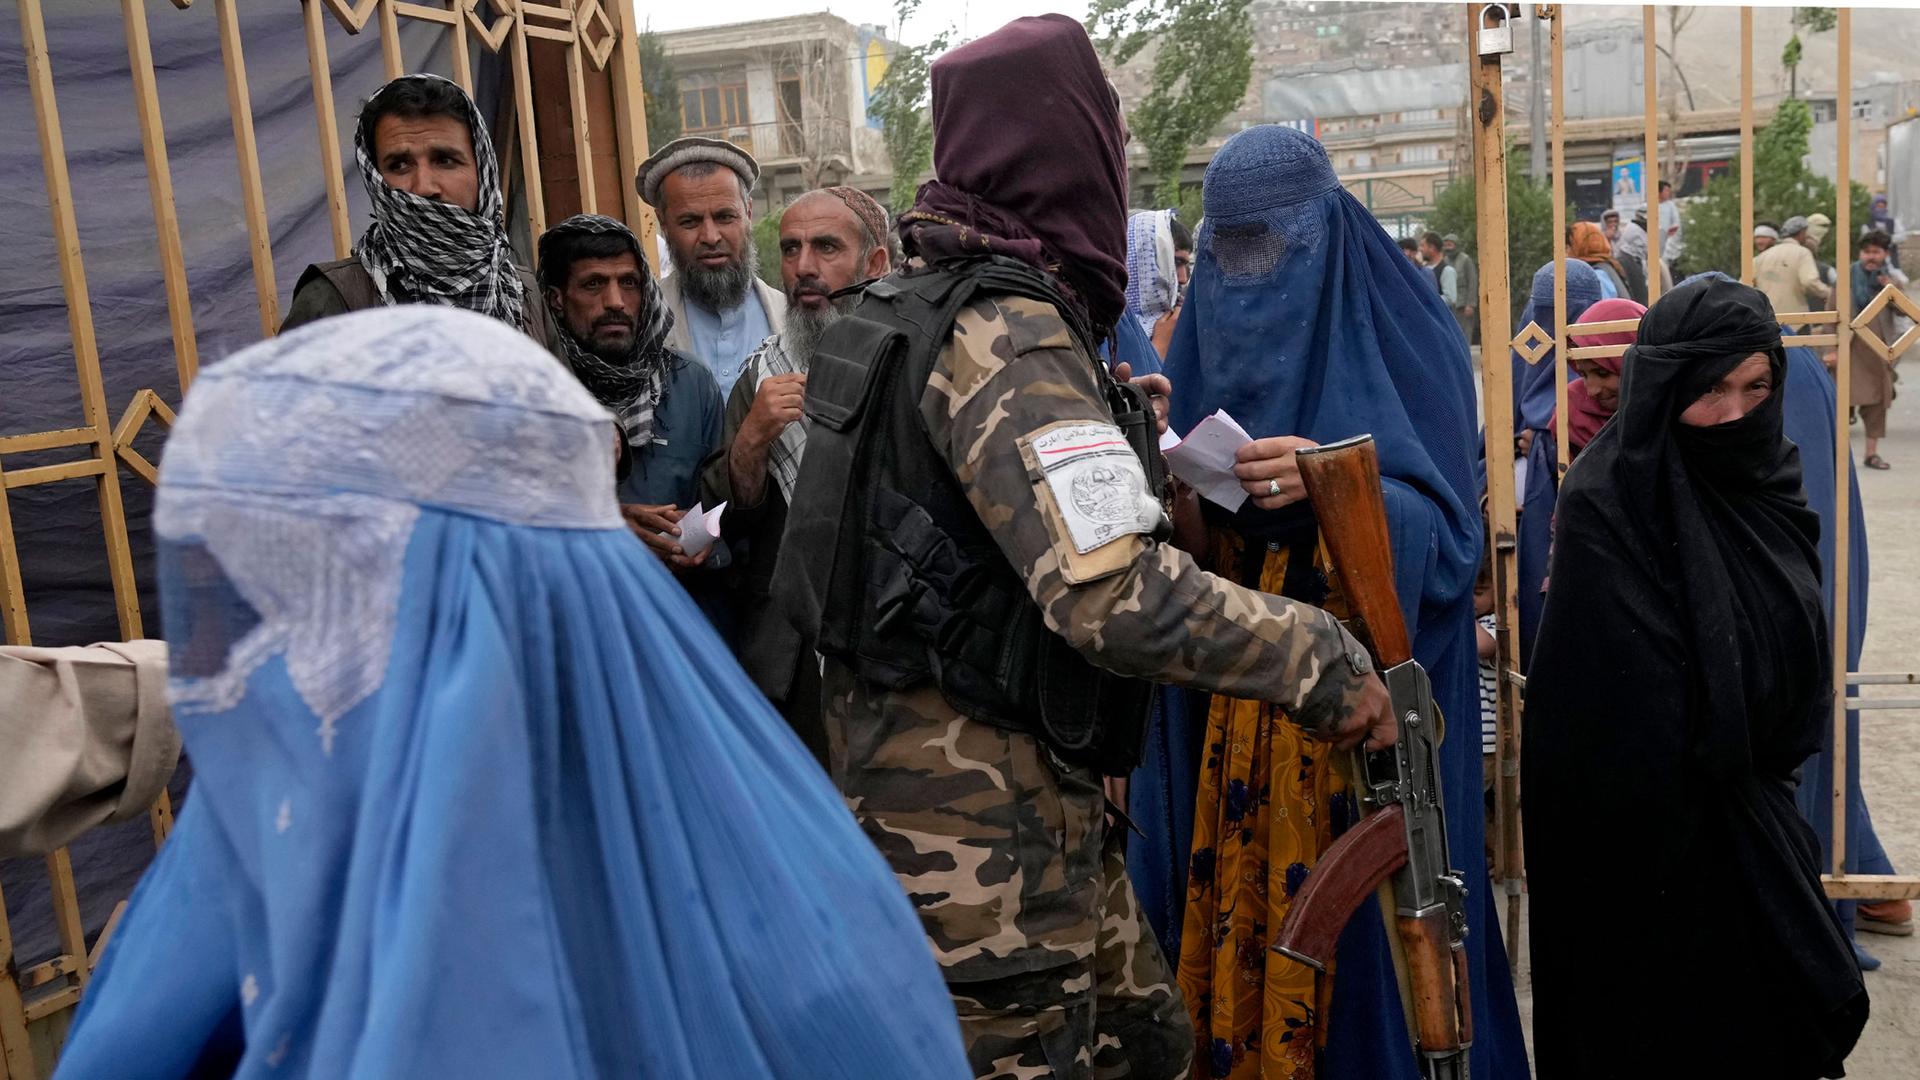 A Taliban fighter stands guard as people wait to receive food rations distributed by a South Korean humanitarian aid group, in Kabul, Afghanistan, May 10, 2022.